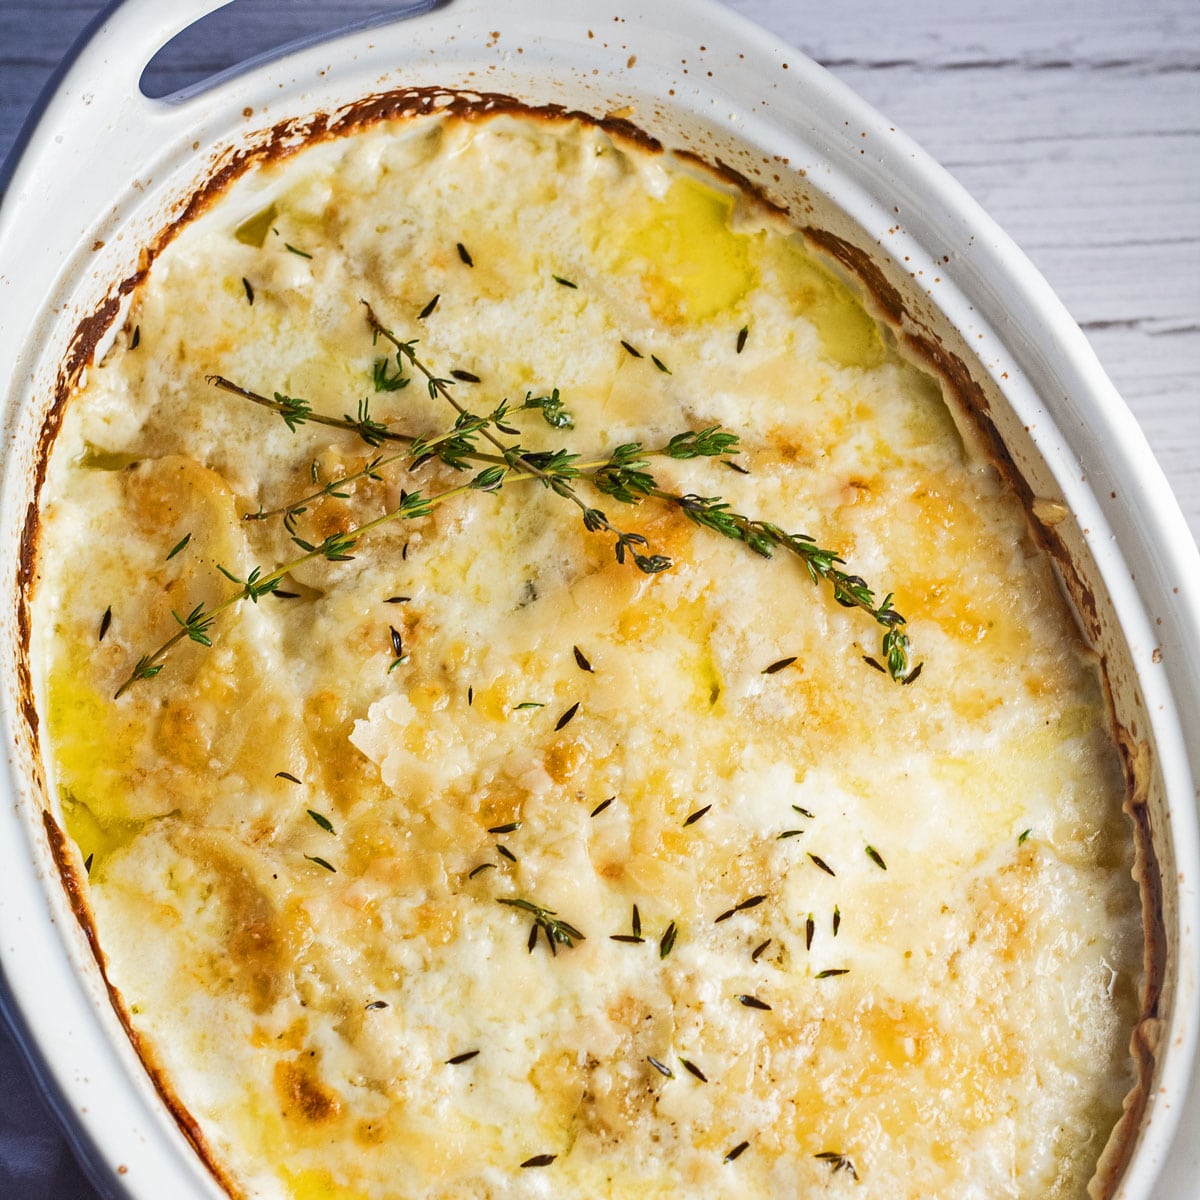 Baked dauphinoise potatoes in white oval casserole dish with fresh thyme garnish.